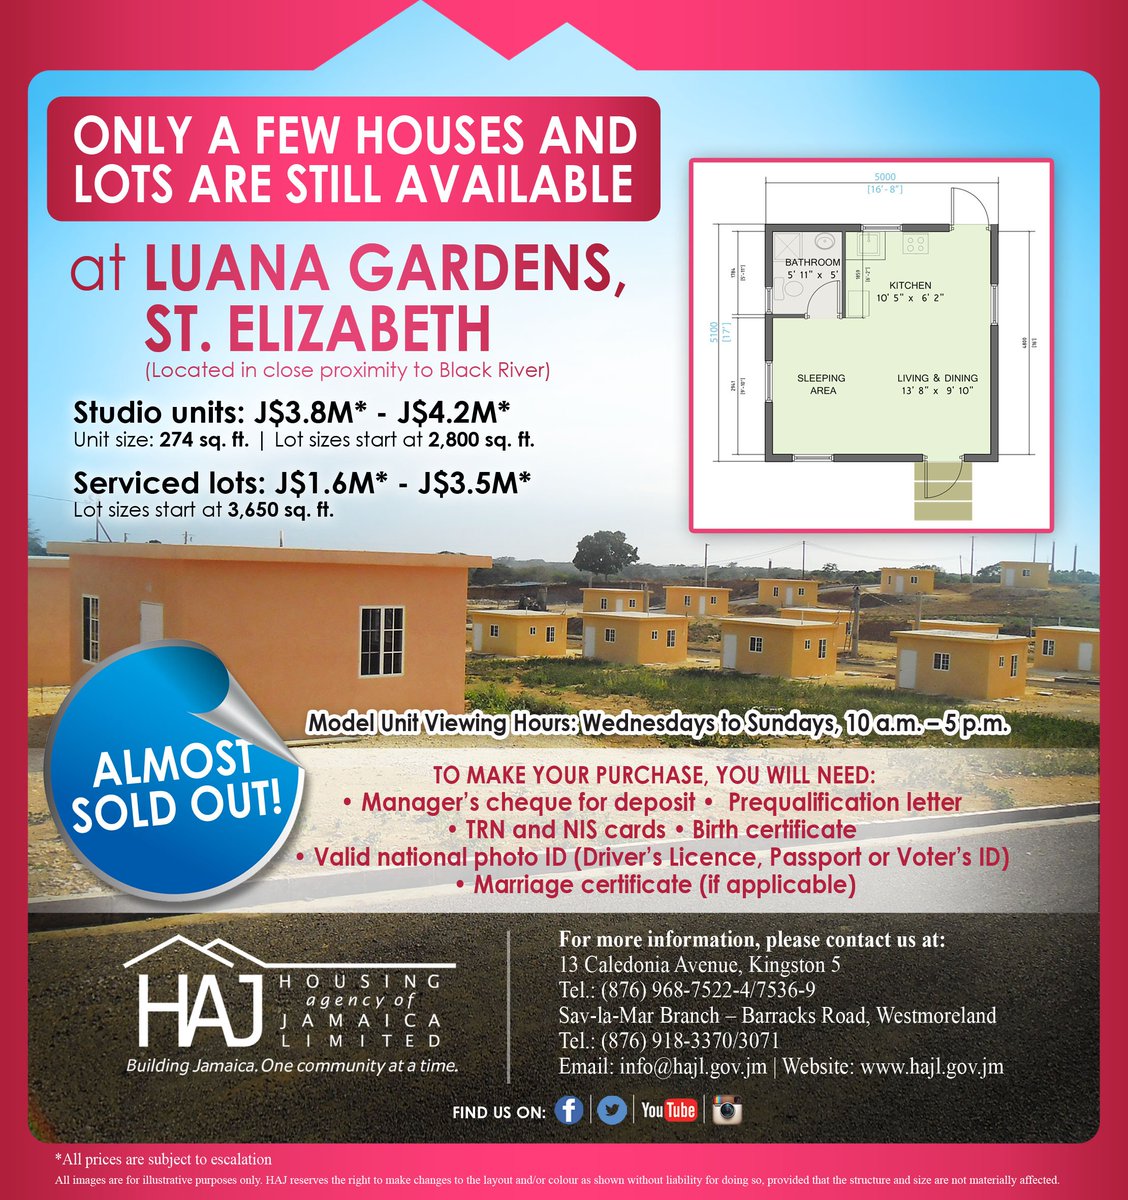 Housing Agency Of Ja On Twitter Only A Few Units Available For